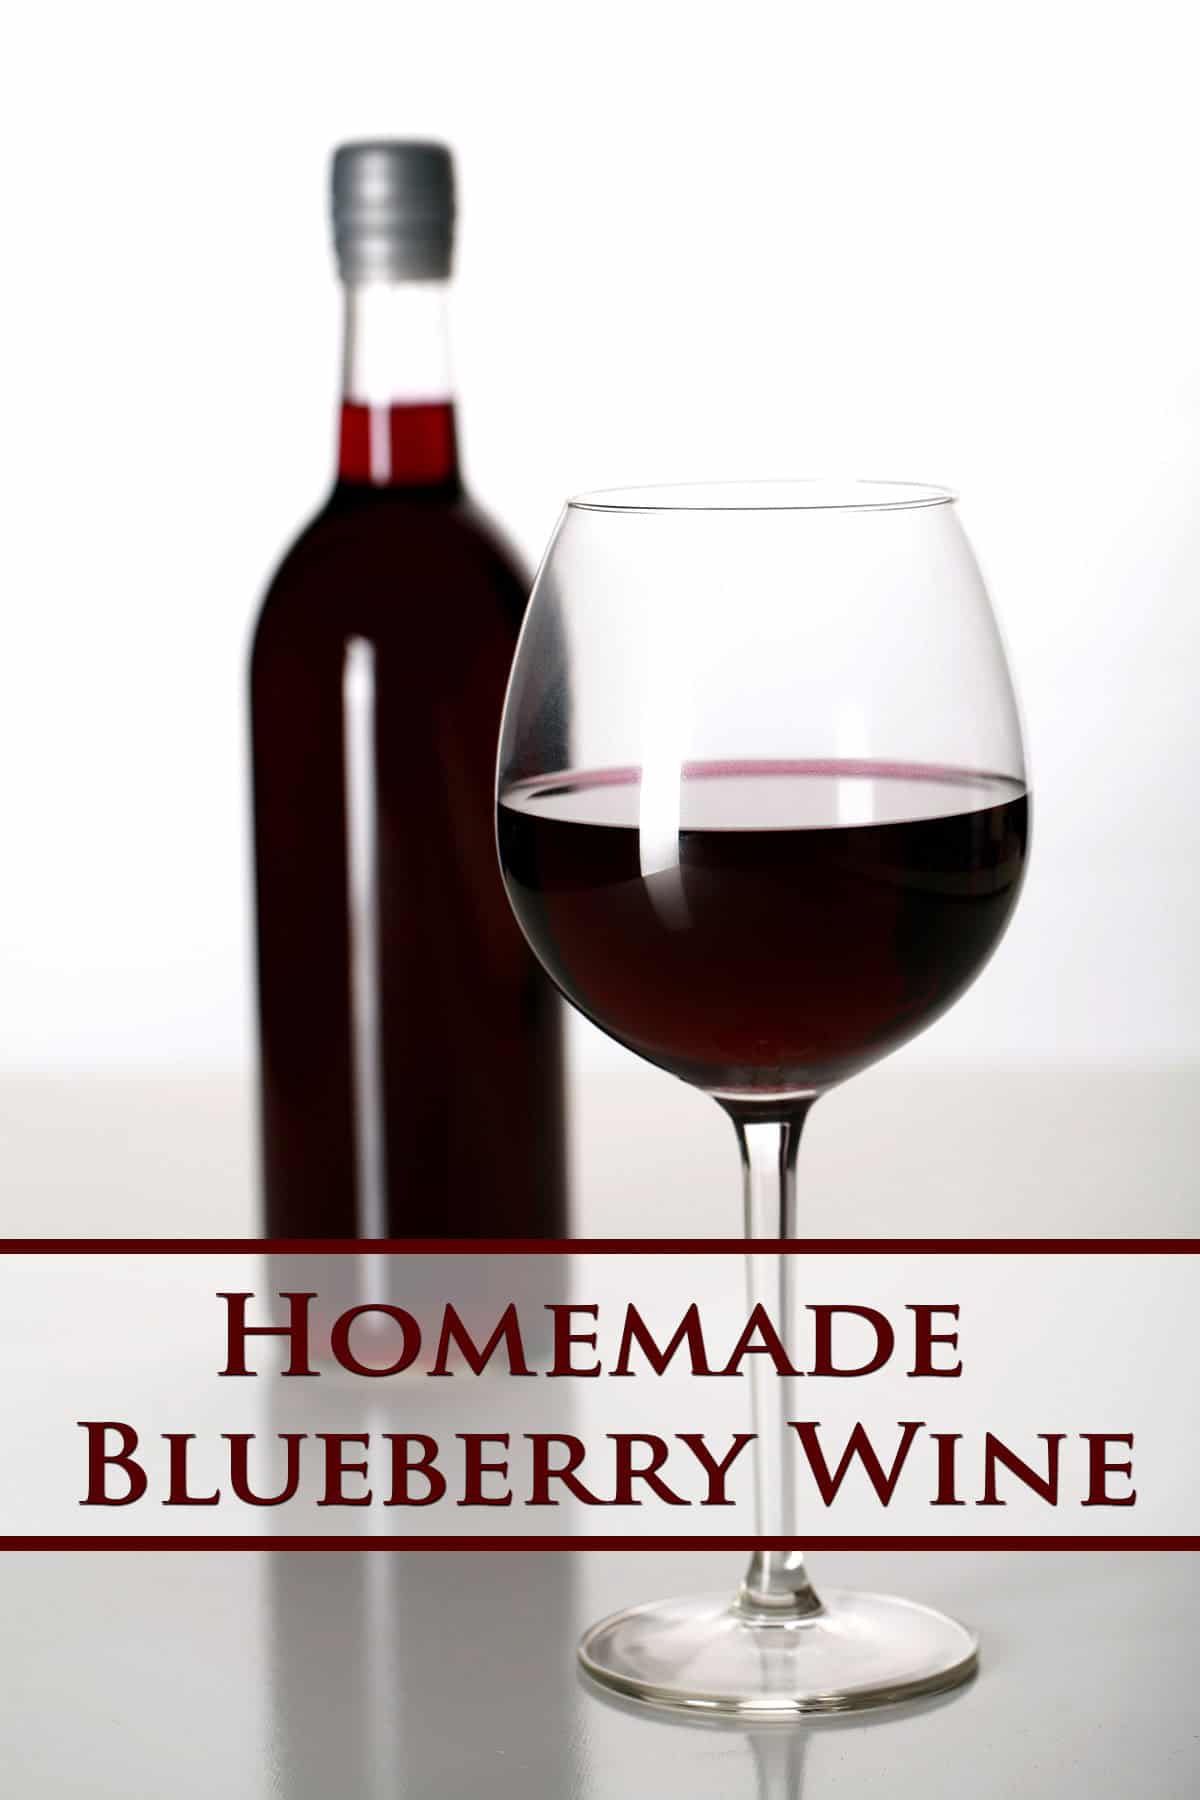 A glass of dark purple wine in front of a bottle of Blueberry wine.